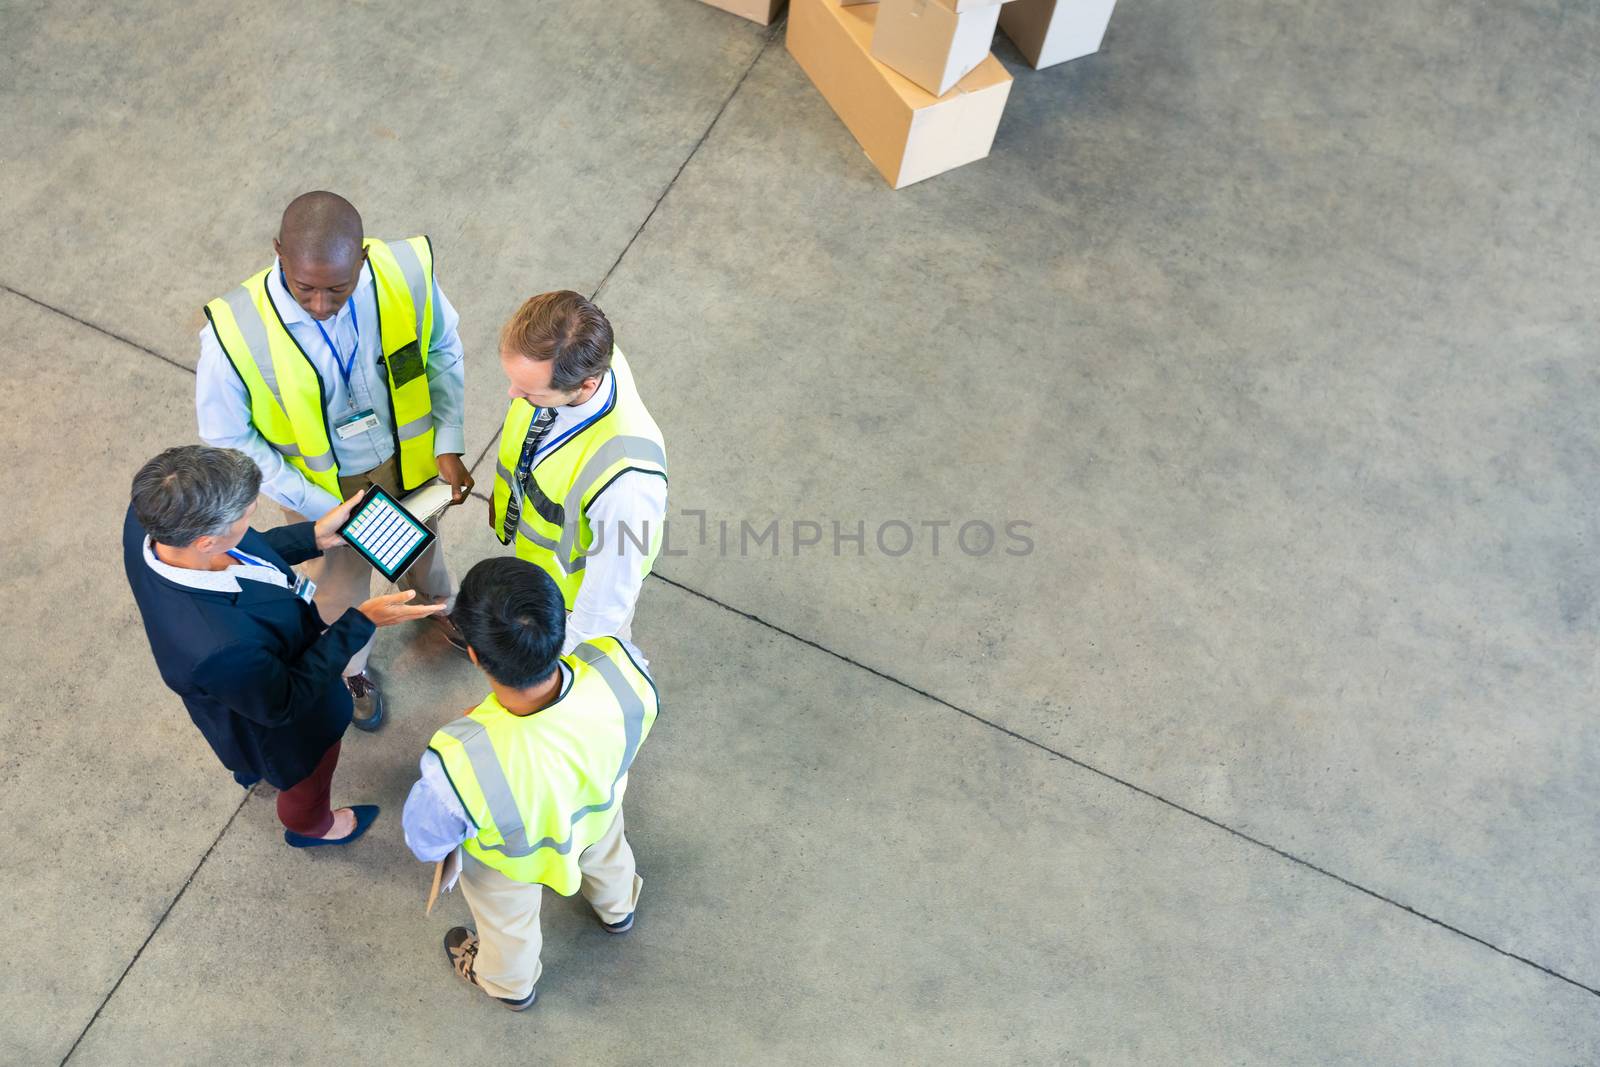 Warehouse staff discussing over digital tablet in warehouse by Wavebreakmedia